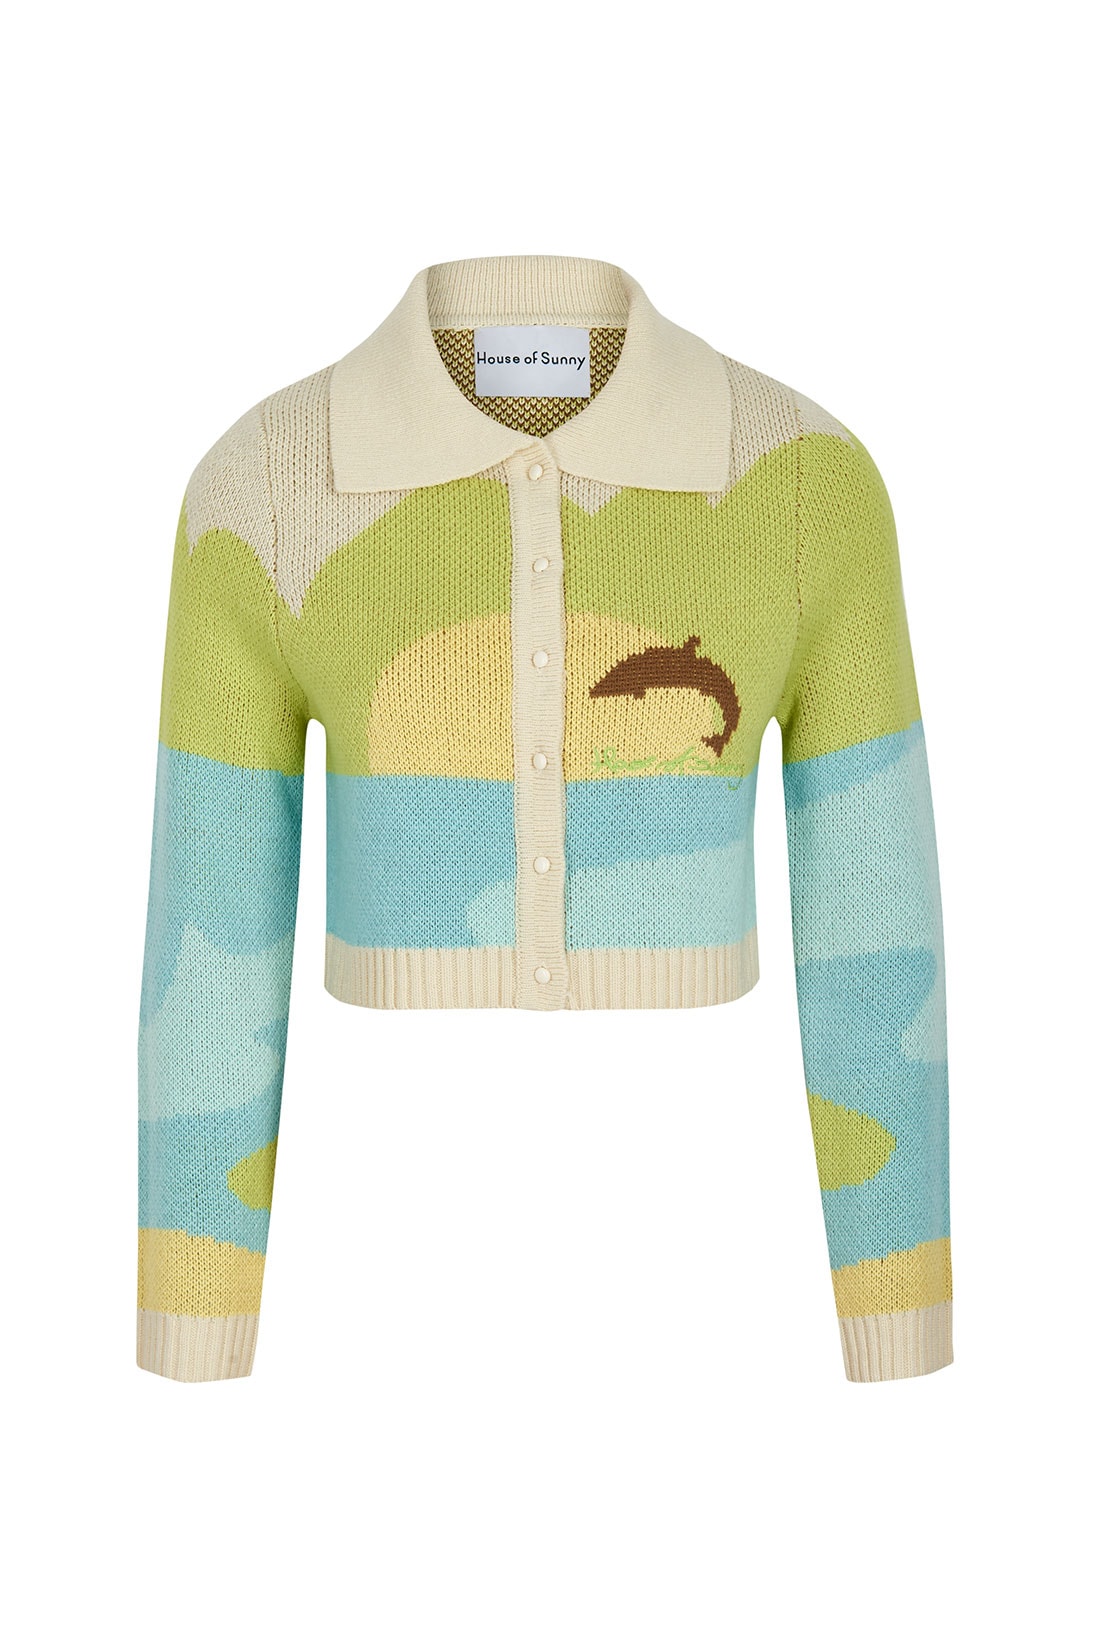 house of sunny spring summer ss21 pure shore collection dolphin knitwear cardigan